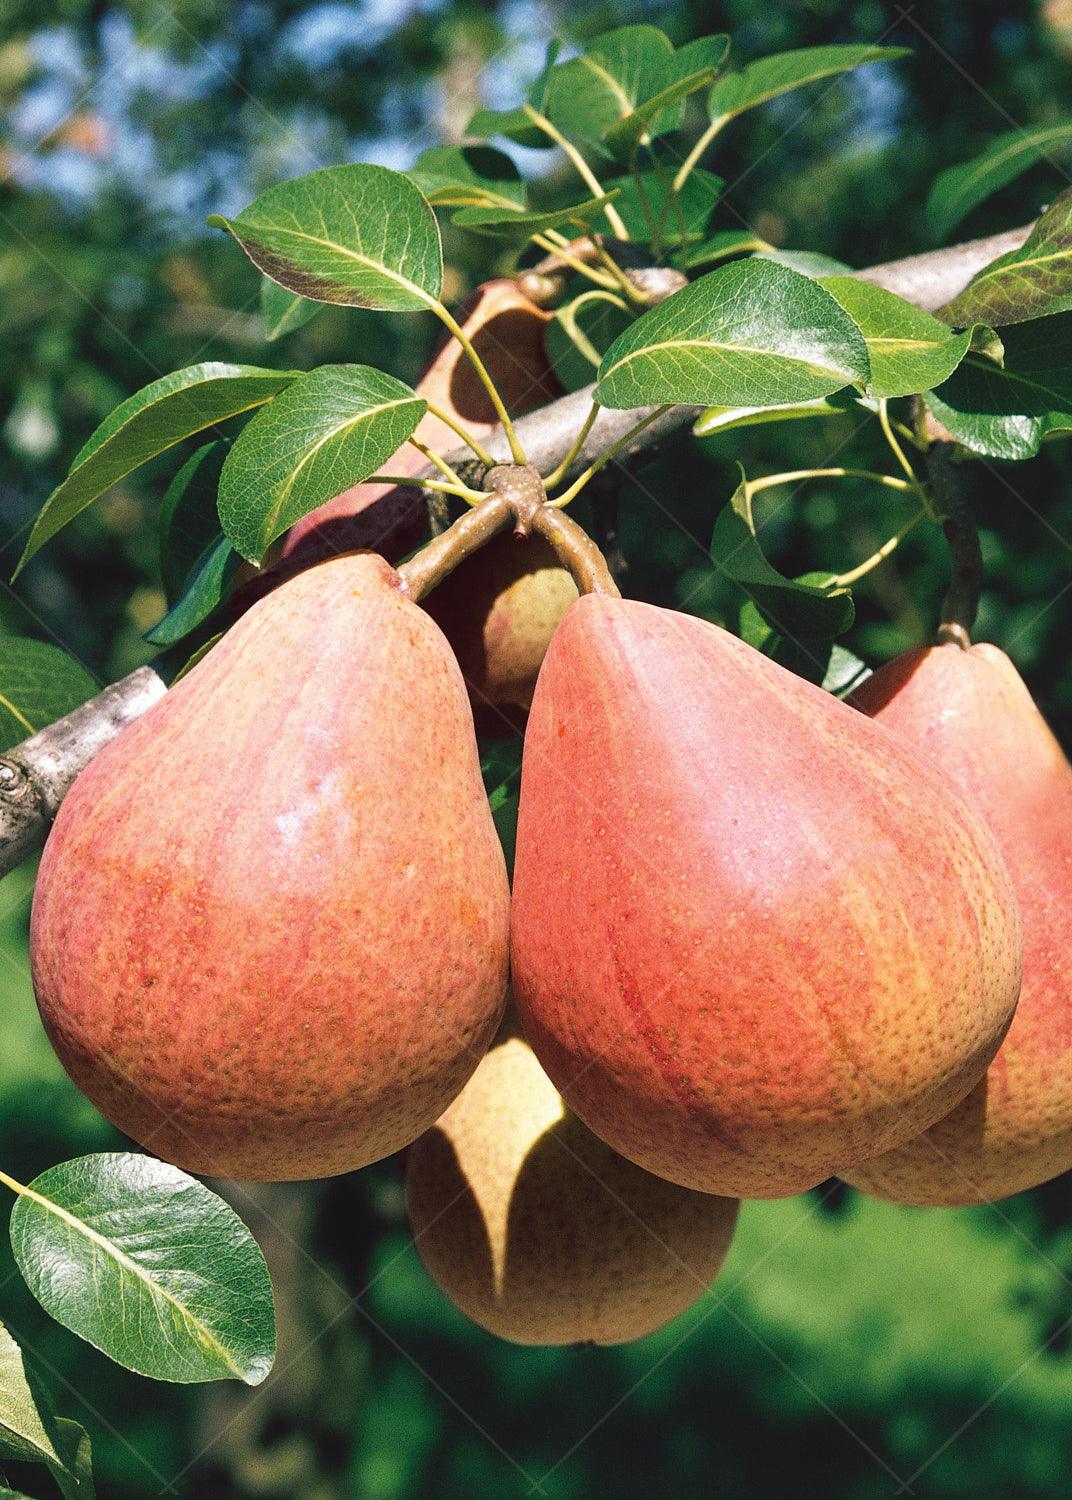 This semi-dwarf tree produces beautiful deep red pears with a sweet and succulent flavor, reaching their peak ripeness in late summer. With a growth range suitable for zones 3 to 4, this pear tree thrives in cooler climates, making it an excellent choice for regions with colder winters. Enjoy the luscious and flavorful pears from your own backyard, and let the Red Clapp's Pear Semi-Dwarf Tree bring the joy of homegrown fruit to your family's table.